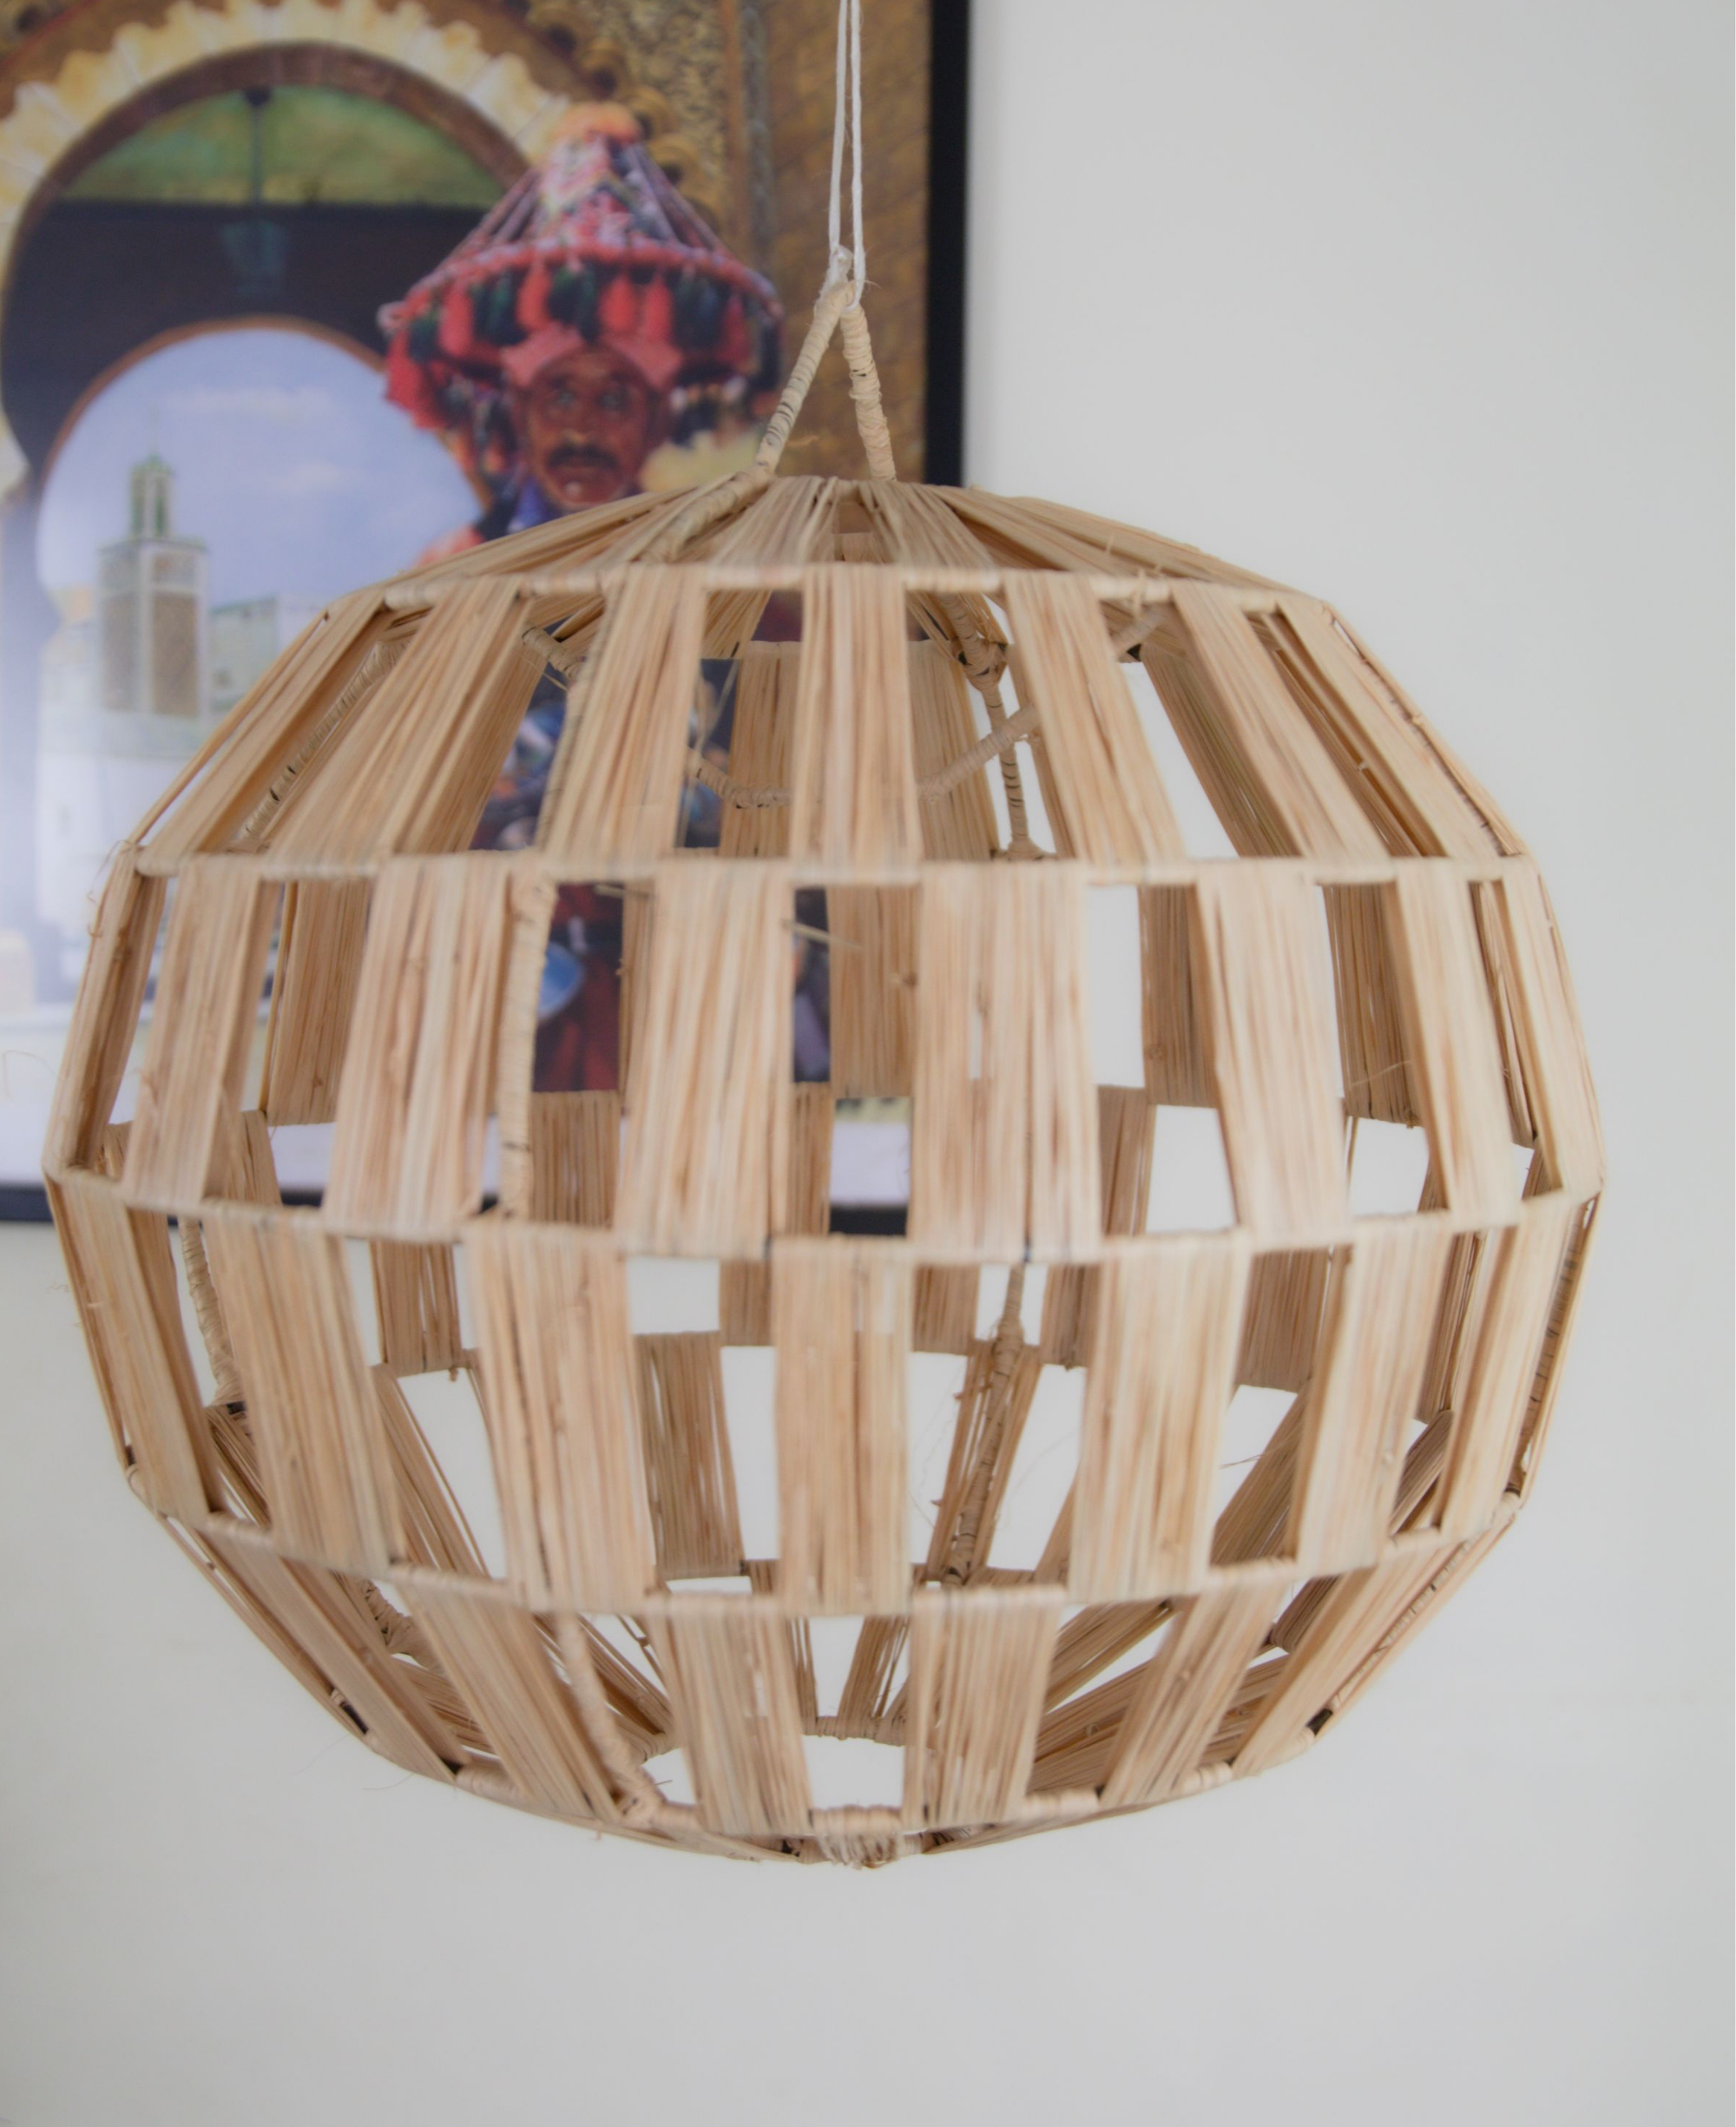 Elevate your space with our Bohemian Doum Suspension Rattan Lampshade. Handcrafted in Morocco from natural straw, this pendant light exudes authentic charm and warmth. Its intricate design allows for a soft, inviting glow, perfect for creating a cozy ambiance in any room. Bring a touch of Moroccan craftsmanship to your decor with this unique piece.